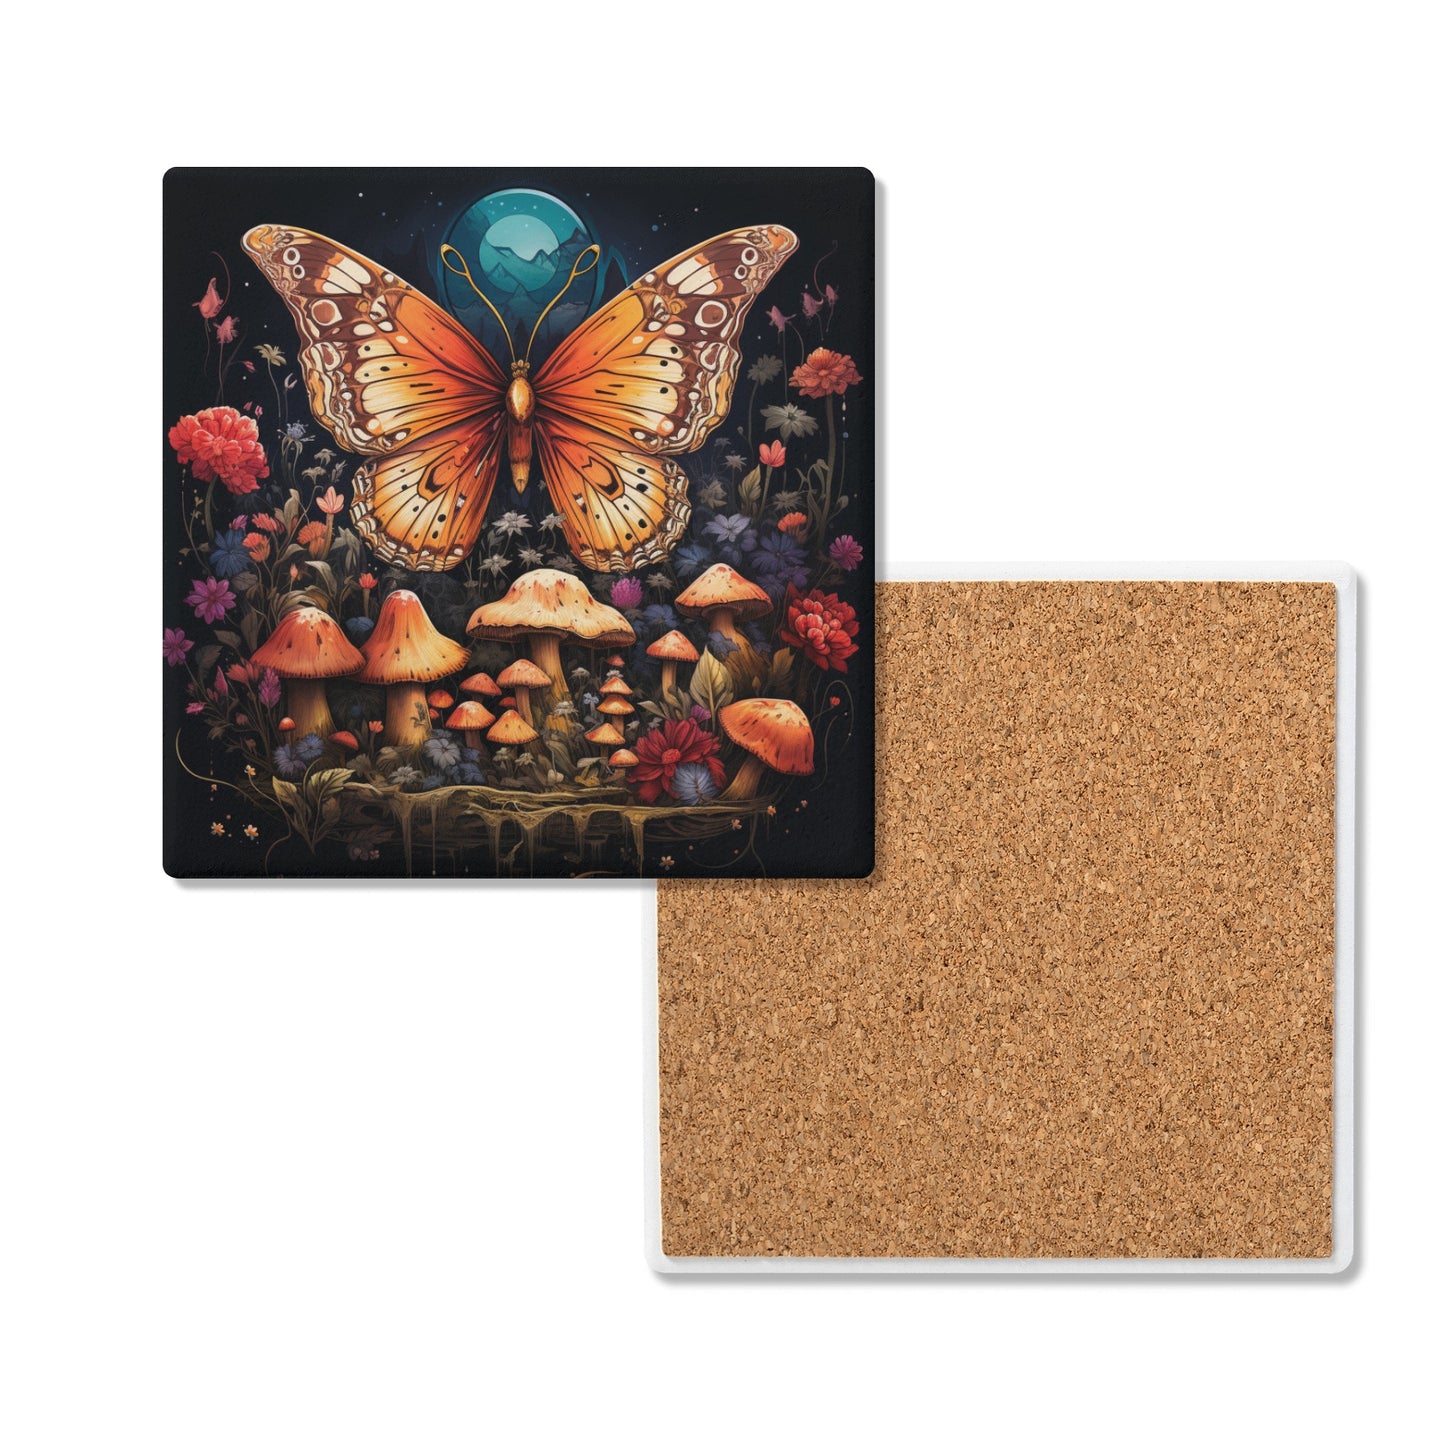 Mystical Butterfly with Mushroom Design Square Ceramic Coasters - Set of 4